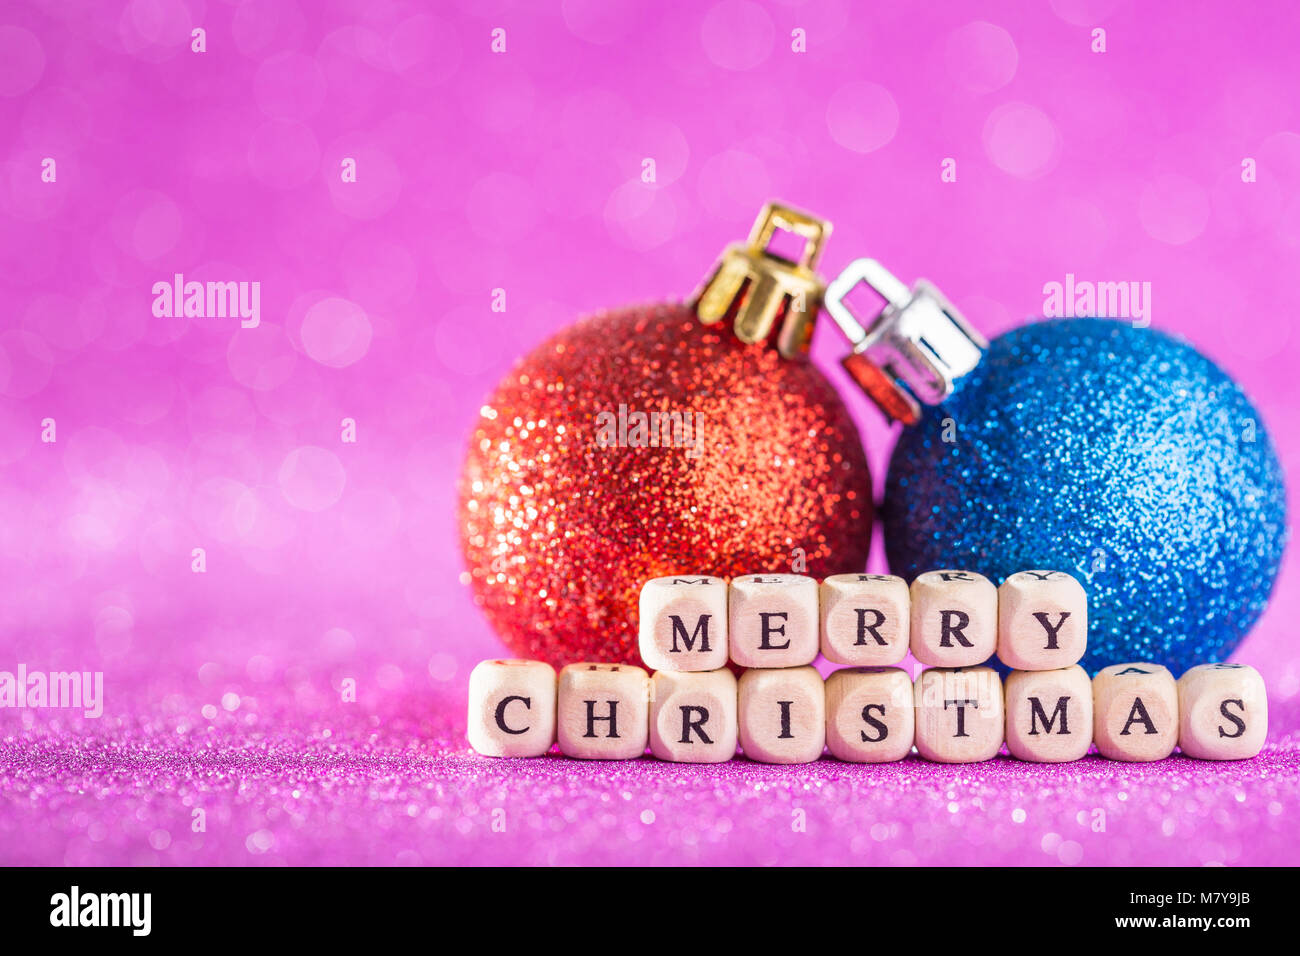 Christmas and New Year Background. Blue аnd Red Christmas Ball on Pink Holiday and New Year Abstract Blurred Defocused Background. For design or photo Stock Photo